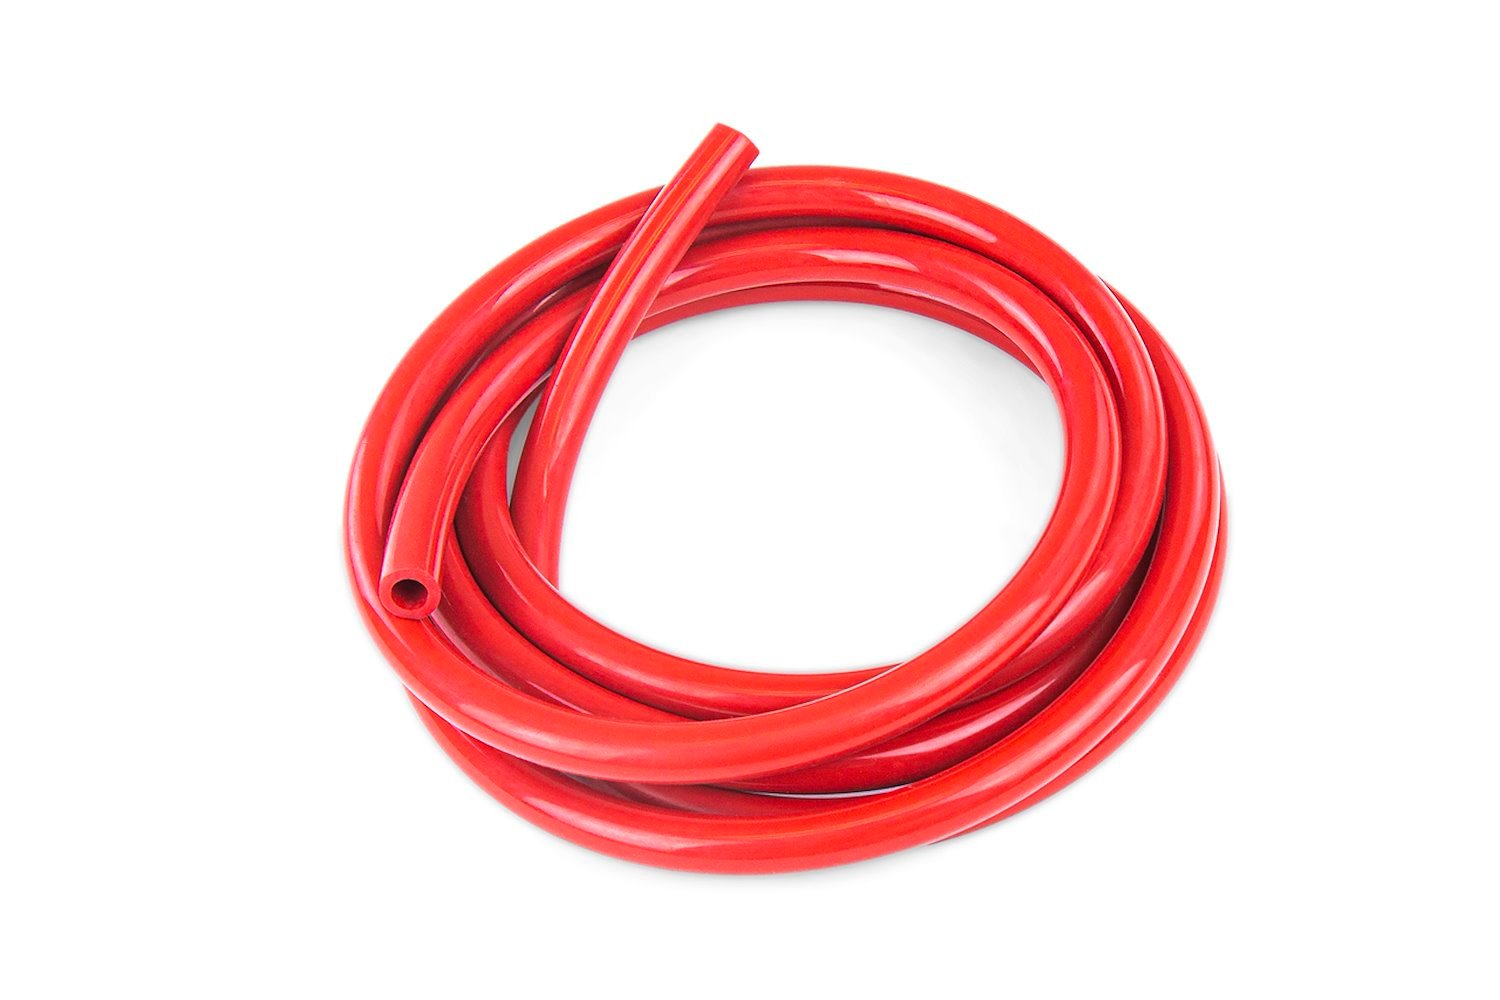 HTSVH7-REDx10 High-Temperature Silicone Vacuum Hose Tubing, 9/32 in. ID, 10 ft. Roll, Red